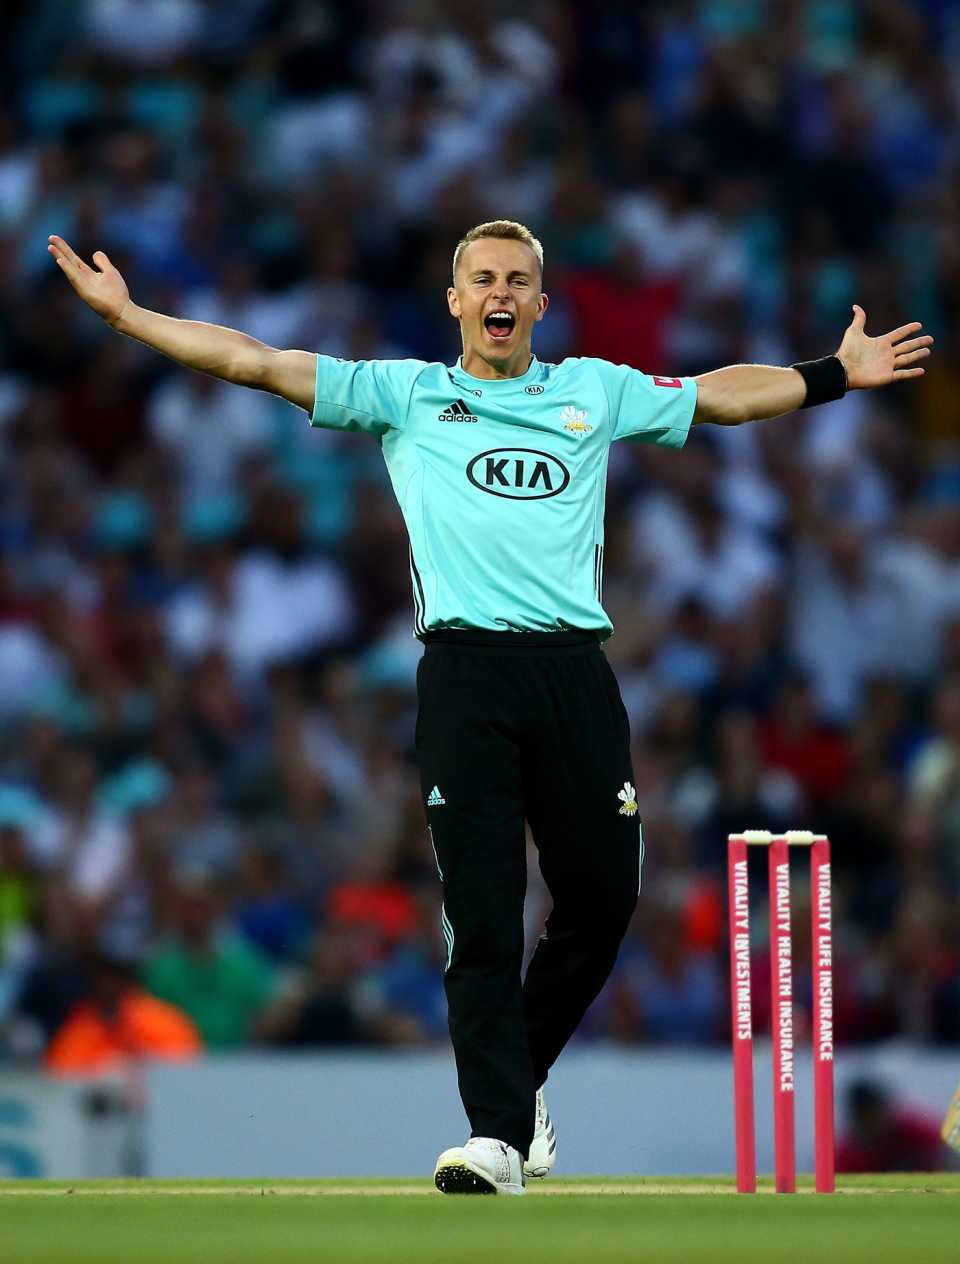 Tom Curran was in the wickets on his comeback from injury